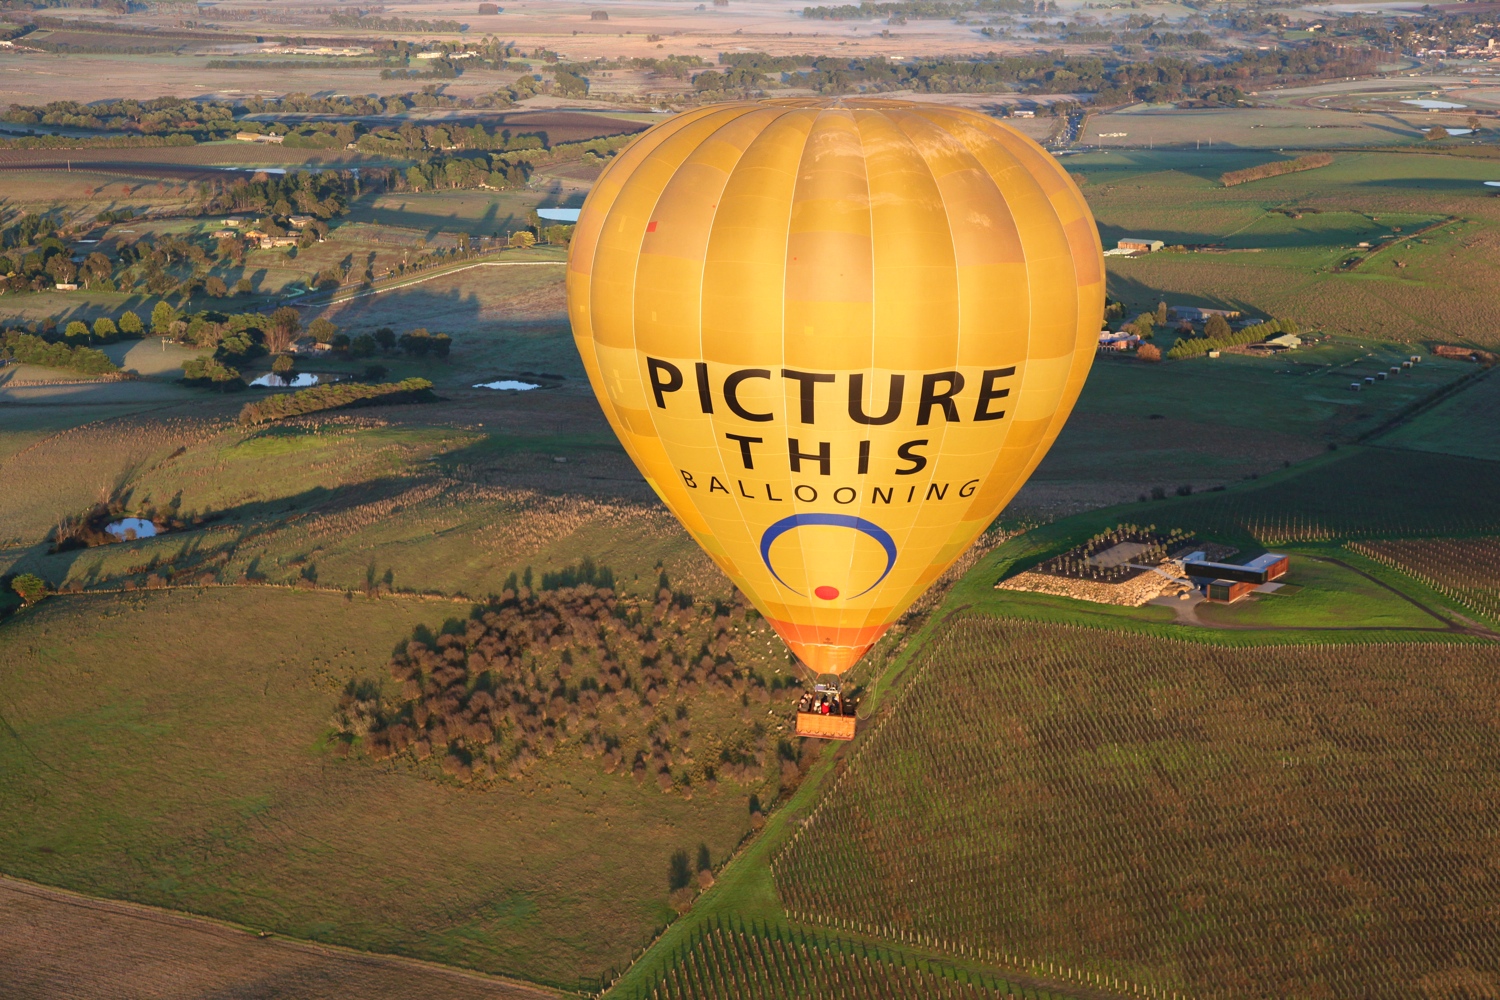 Picture This Hot Air Balloon over Yarra Valley 4.jpeg